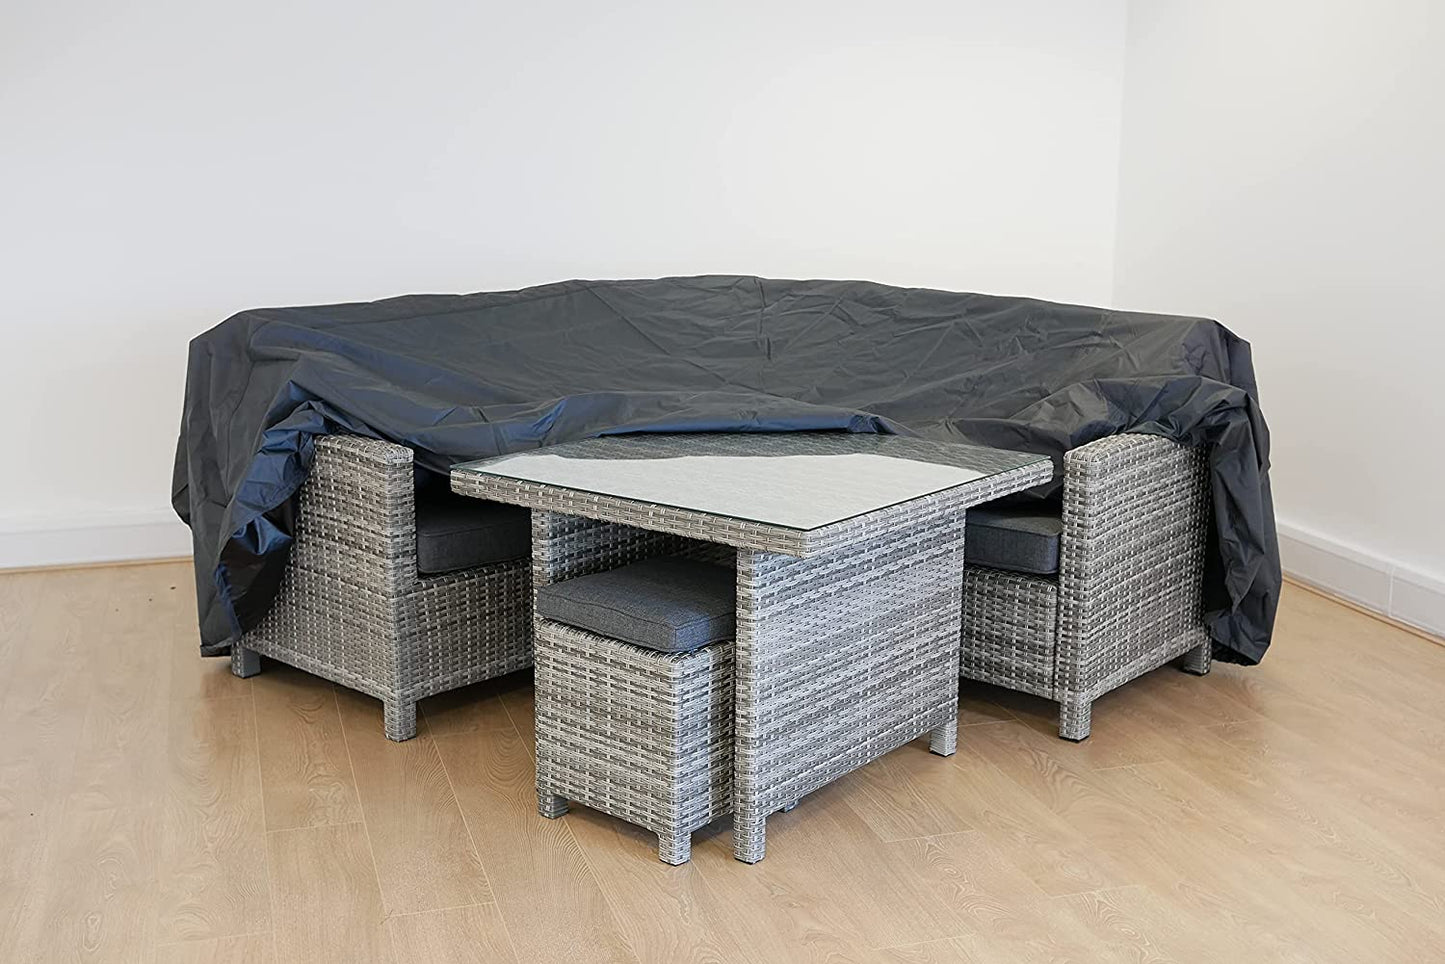 Outdoor Garden Furniture Cover For Square Lounge Set - Colour Box Packaging - 300x300x70cm